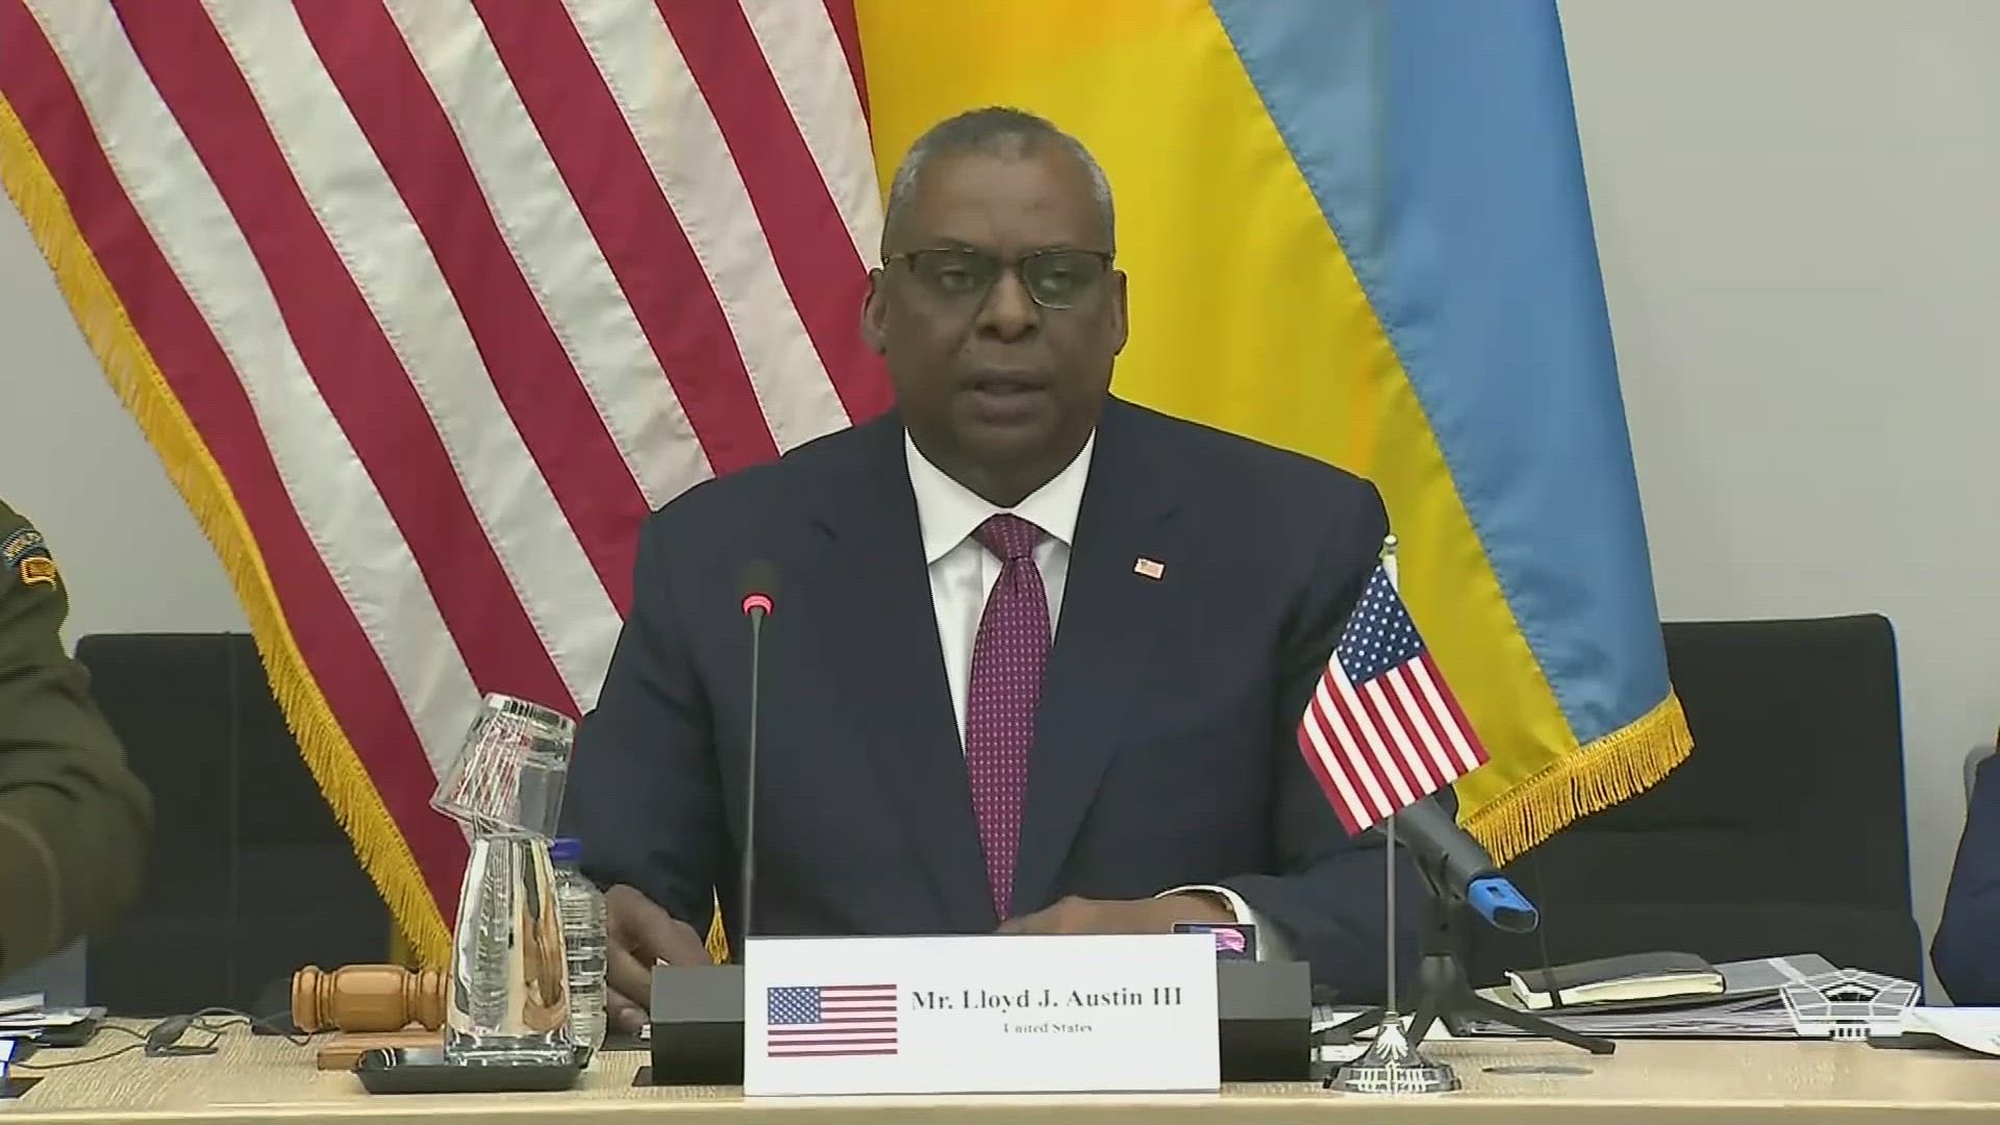 Secretary of Defense Lloyd J. Austin III speaks at a meeting of the Ukraine Defense Contact Group in Brussels. Defense ministers and chiefs of defense from around the world discuss the ongoing crisis and other security issues facing U.S. allies and partners.